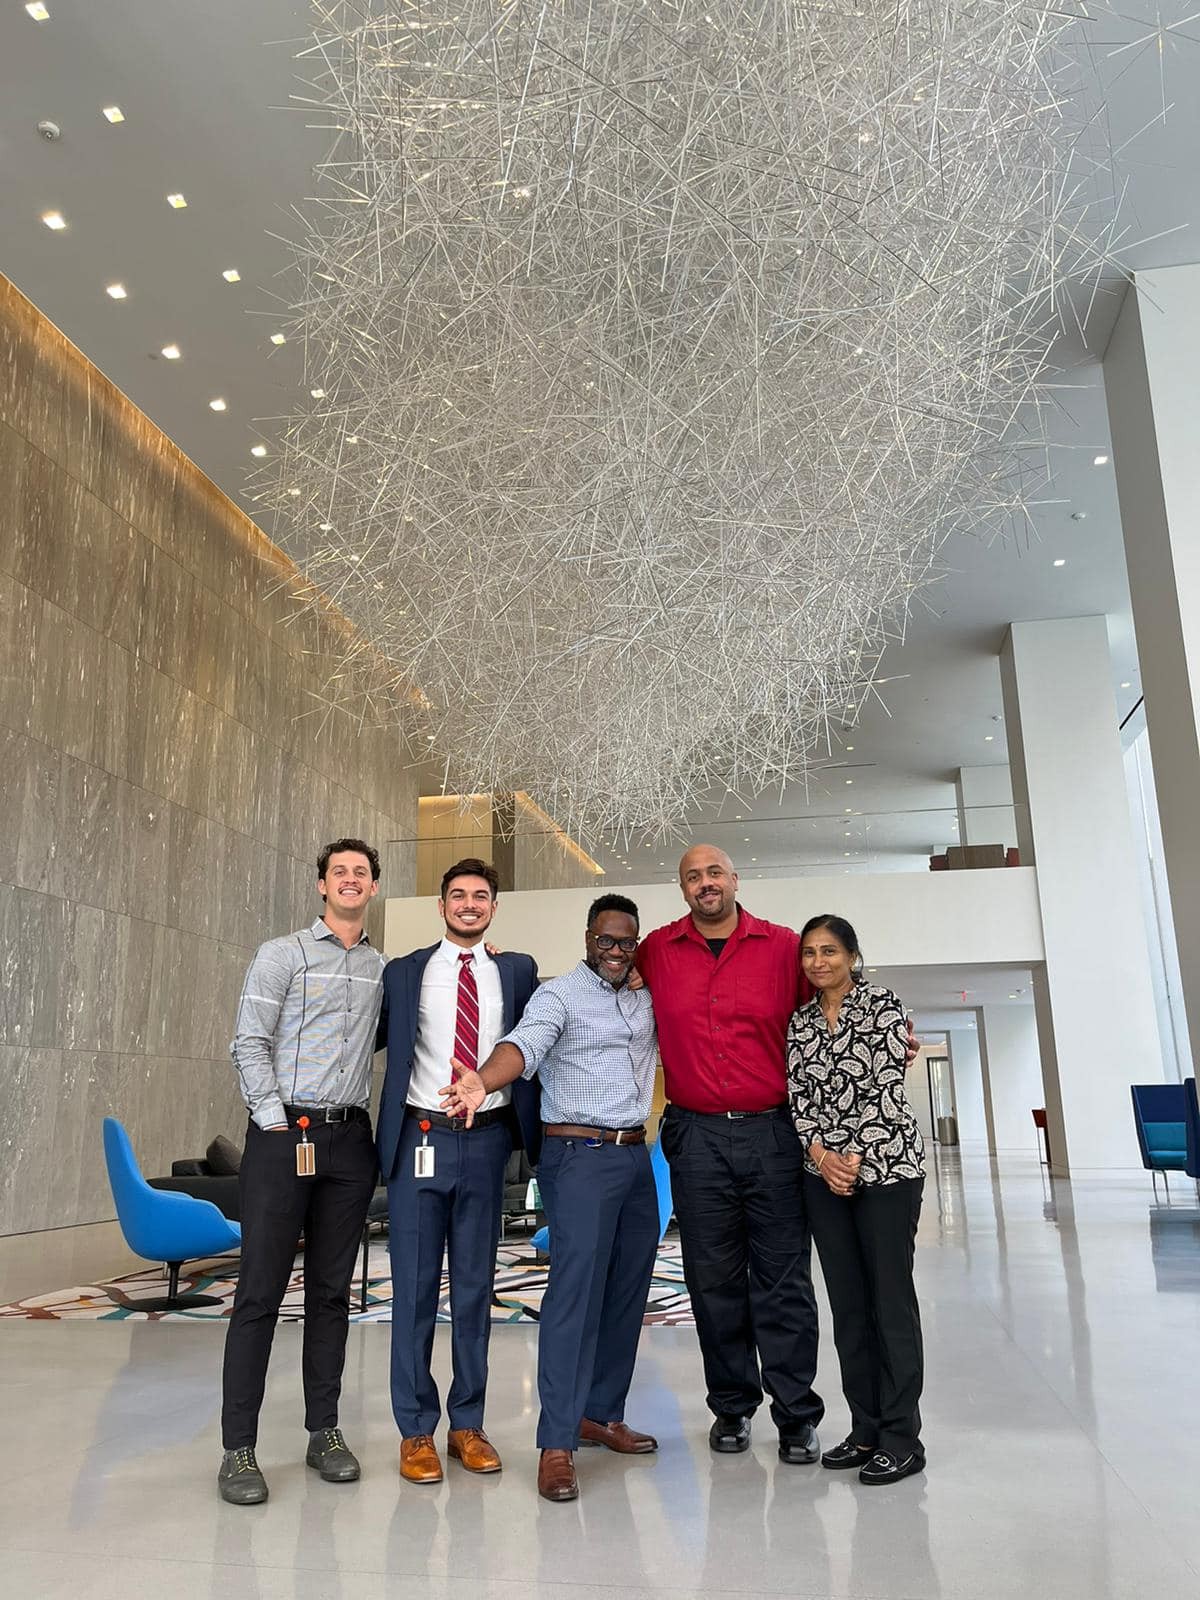 Interns with our People Champion, William Mouton at the Houston office